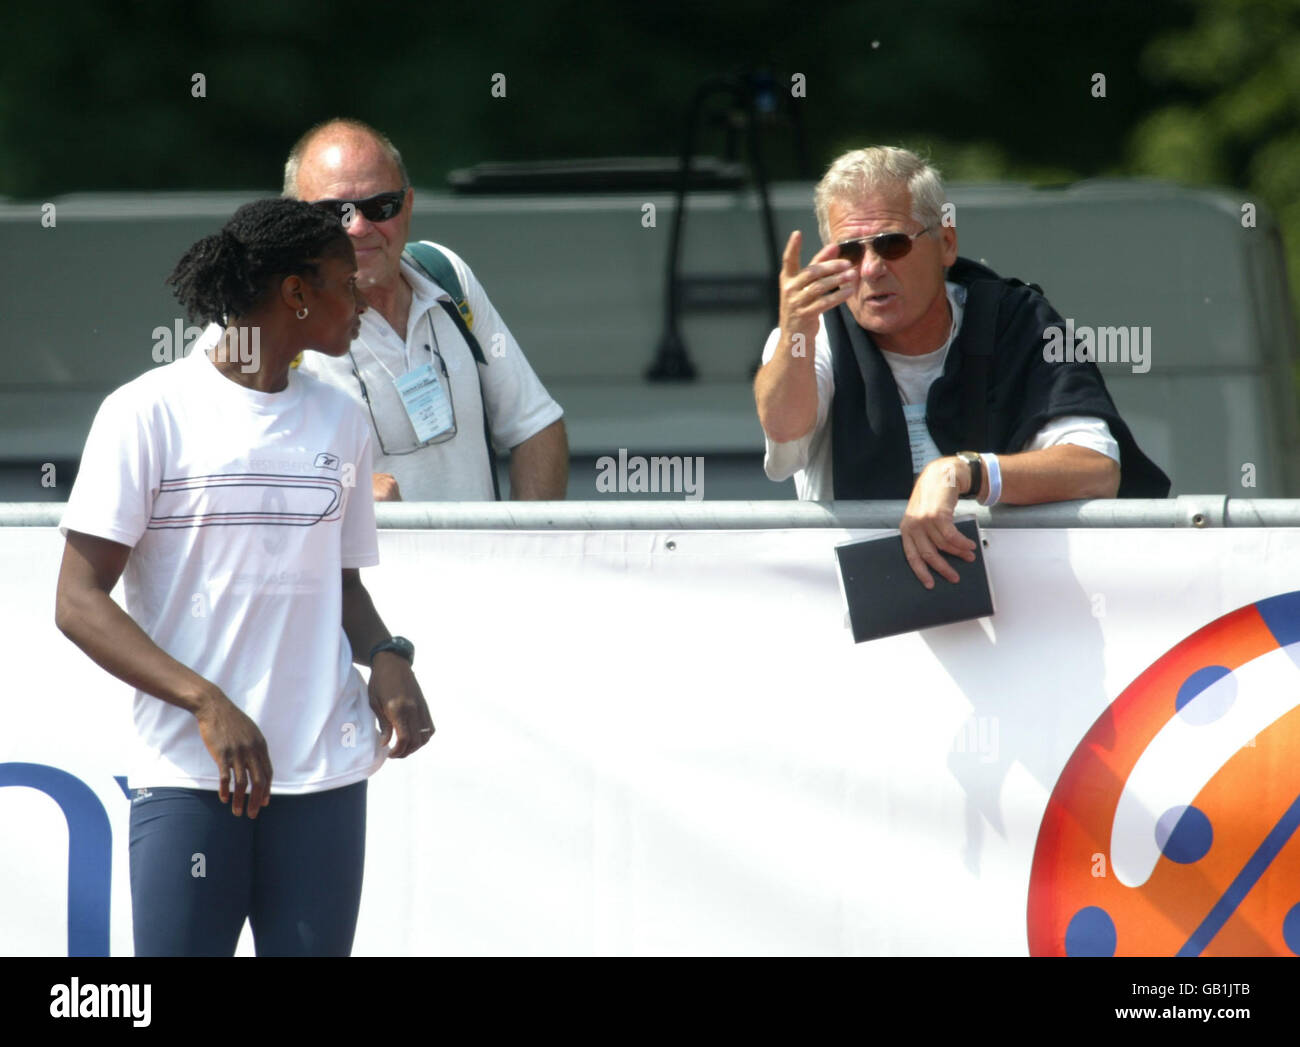 Athletics - European Cup Combined Events - First League. Denise Lewis chats to her coach Ekkart Arbeit (right) before the start of the high jump Stock Photo